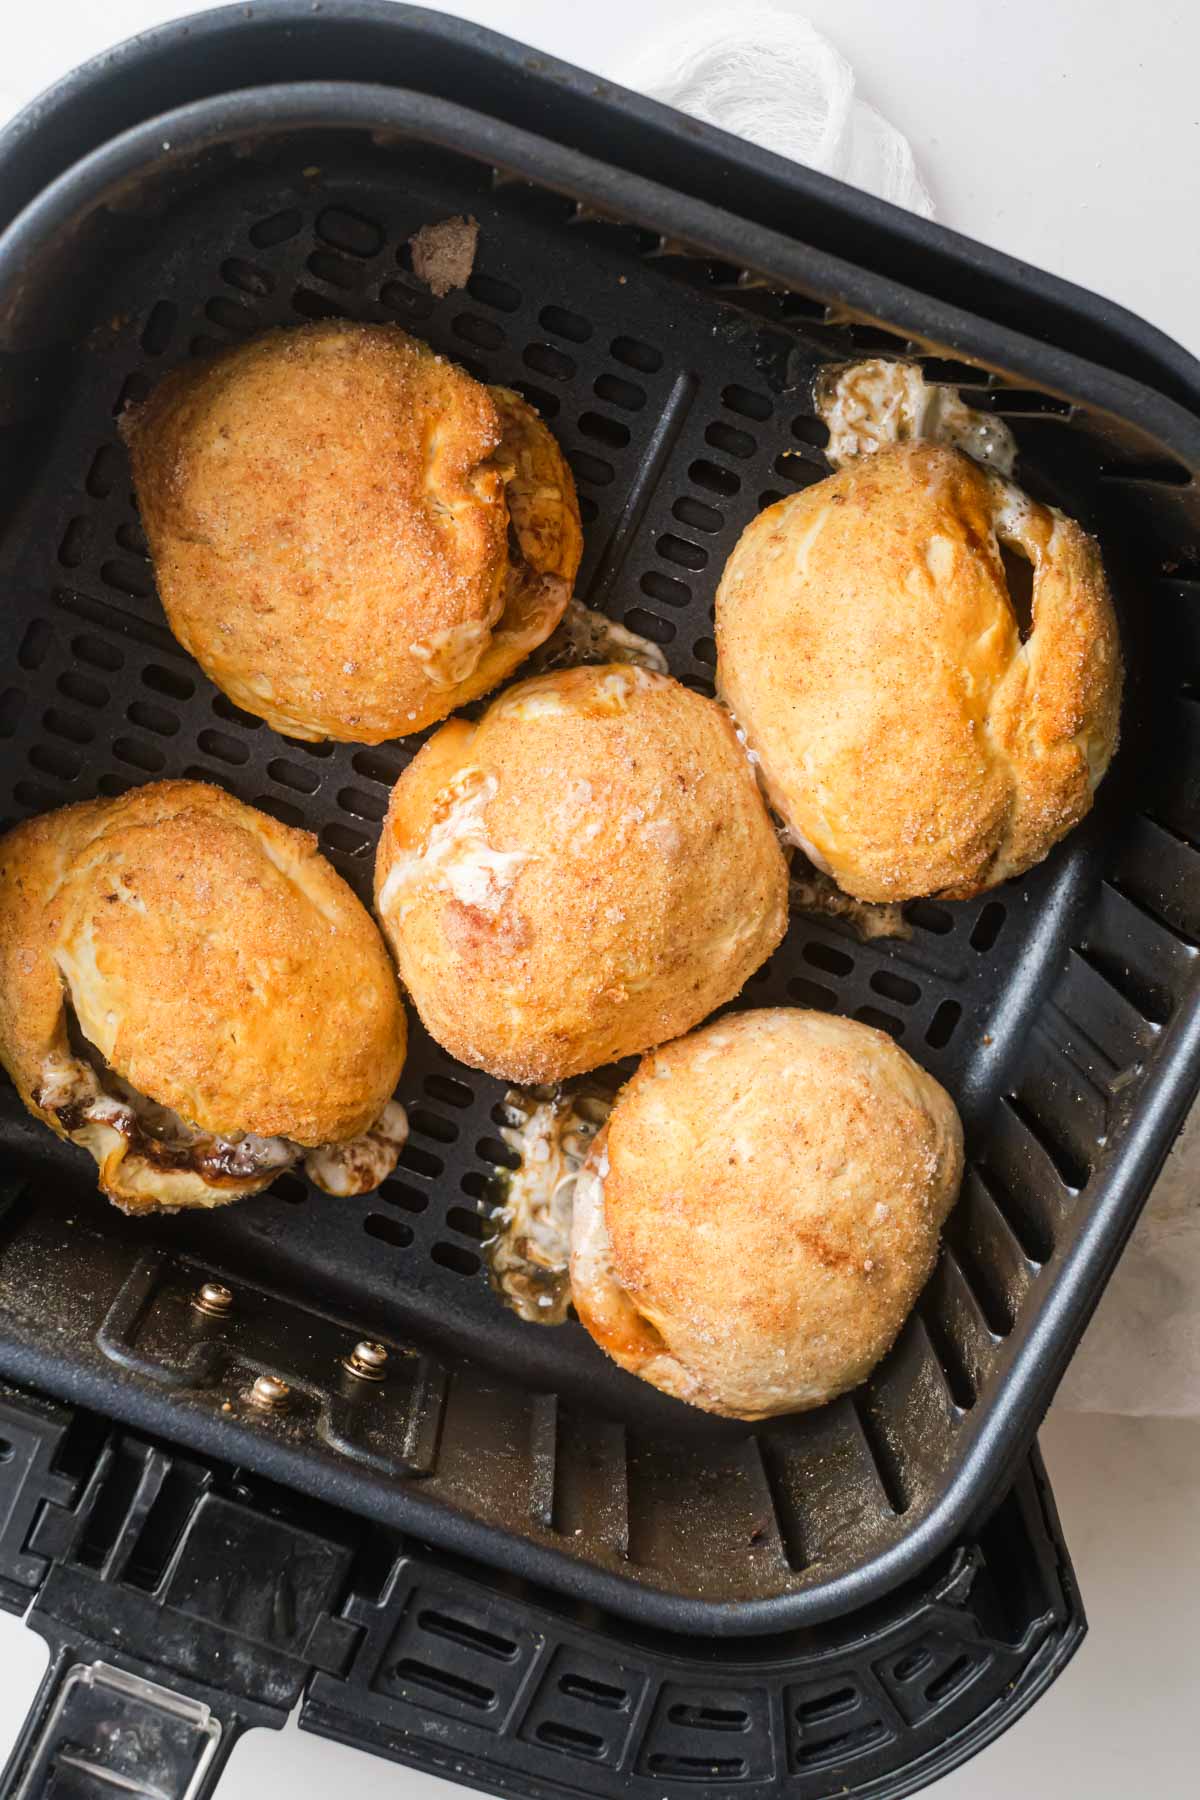 top down view of the cooked air fryer peeps rolls inside the air fryer basket